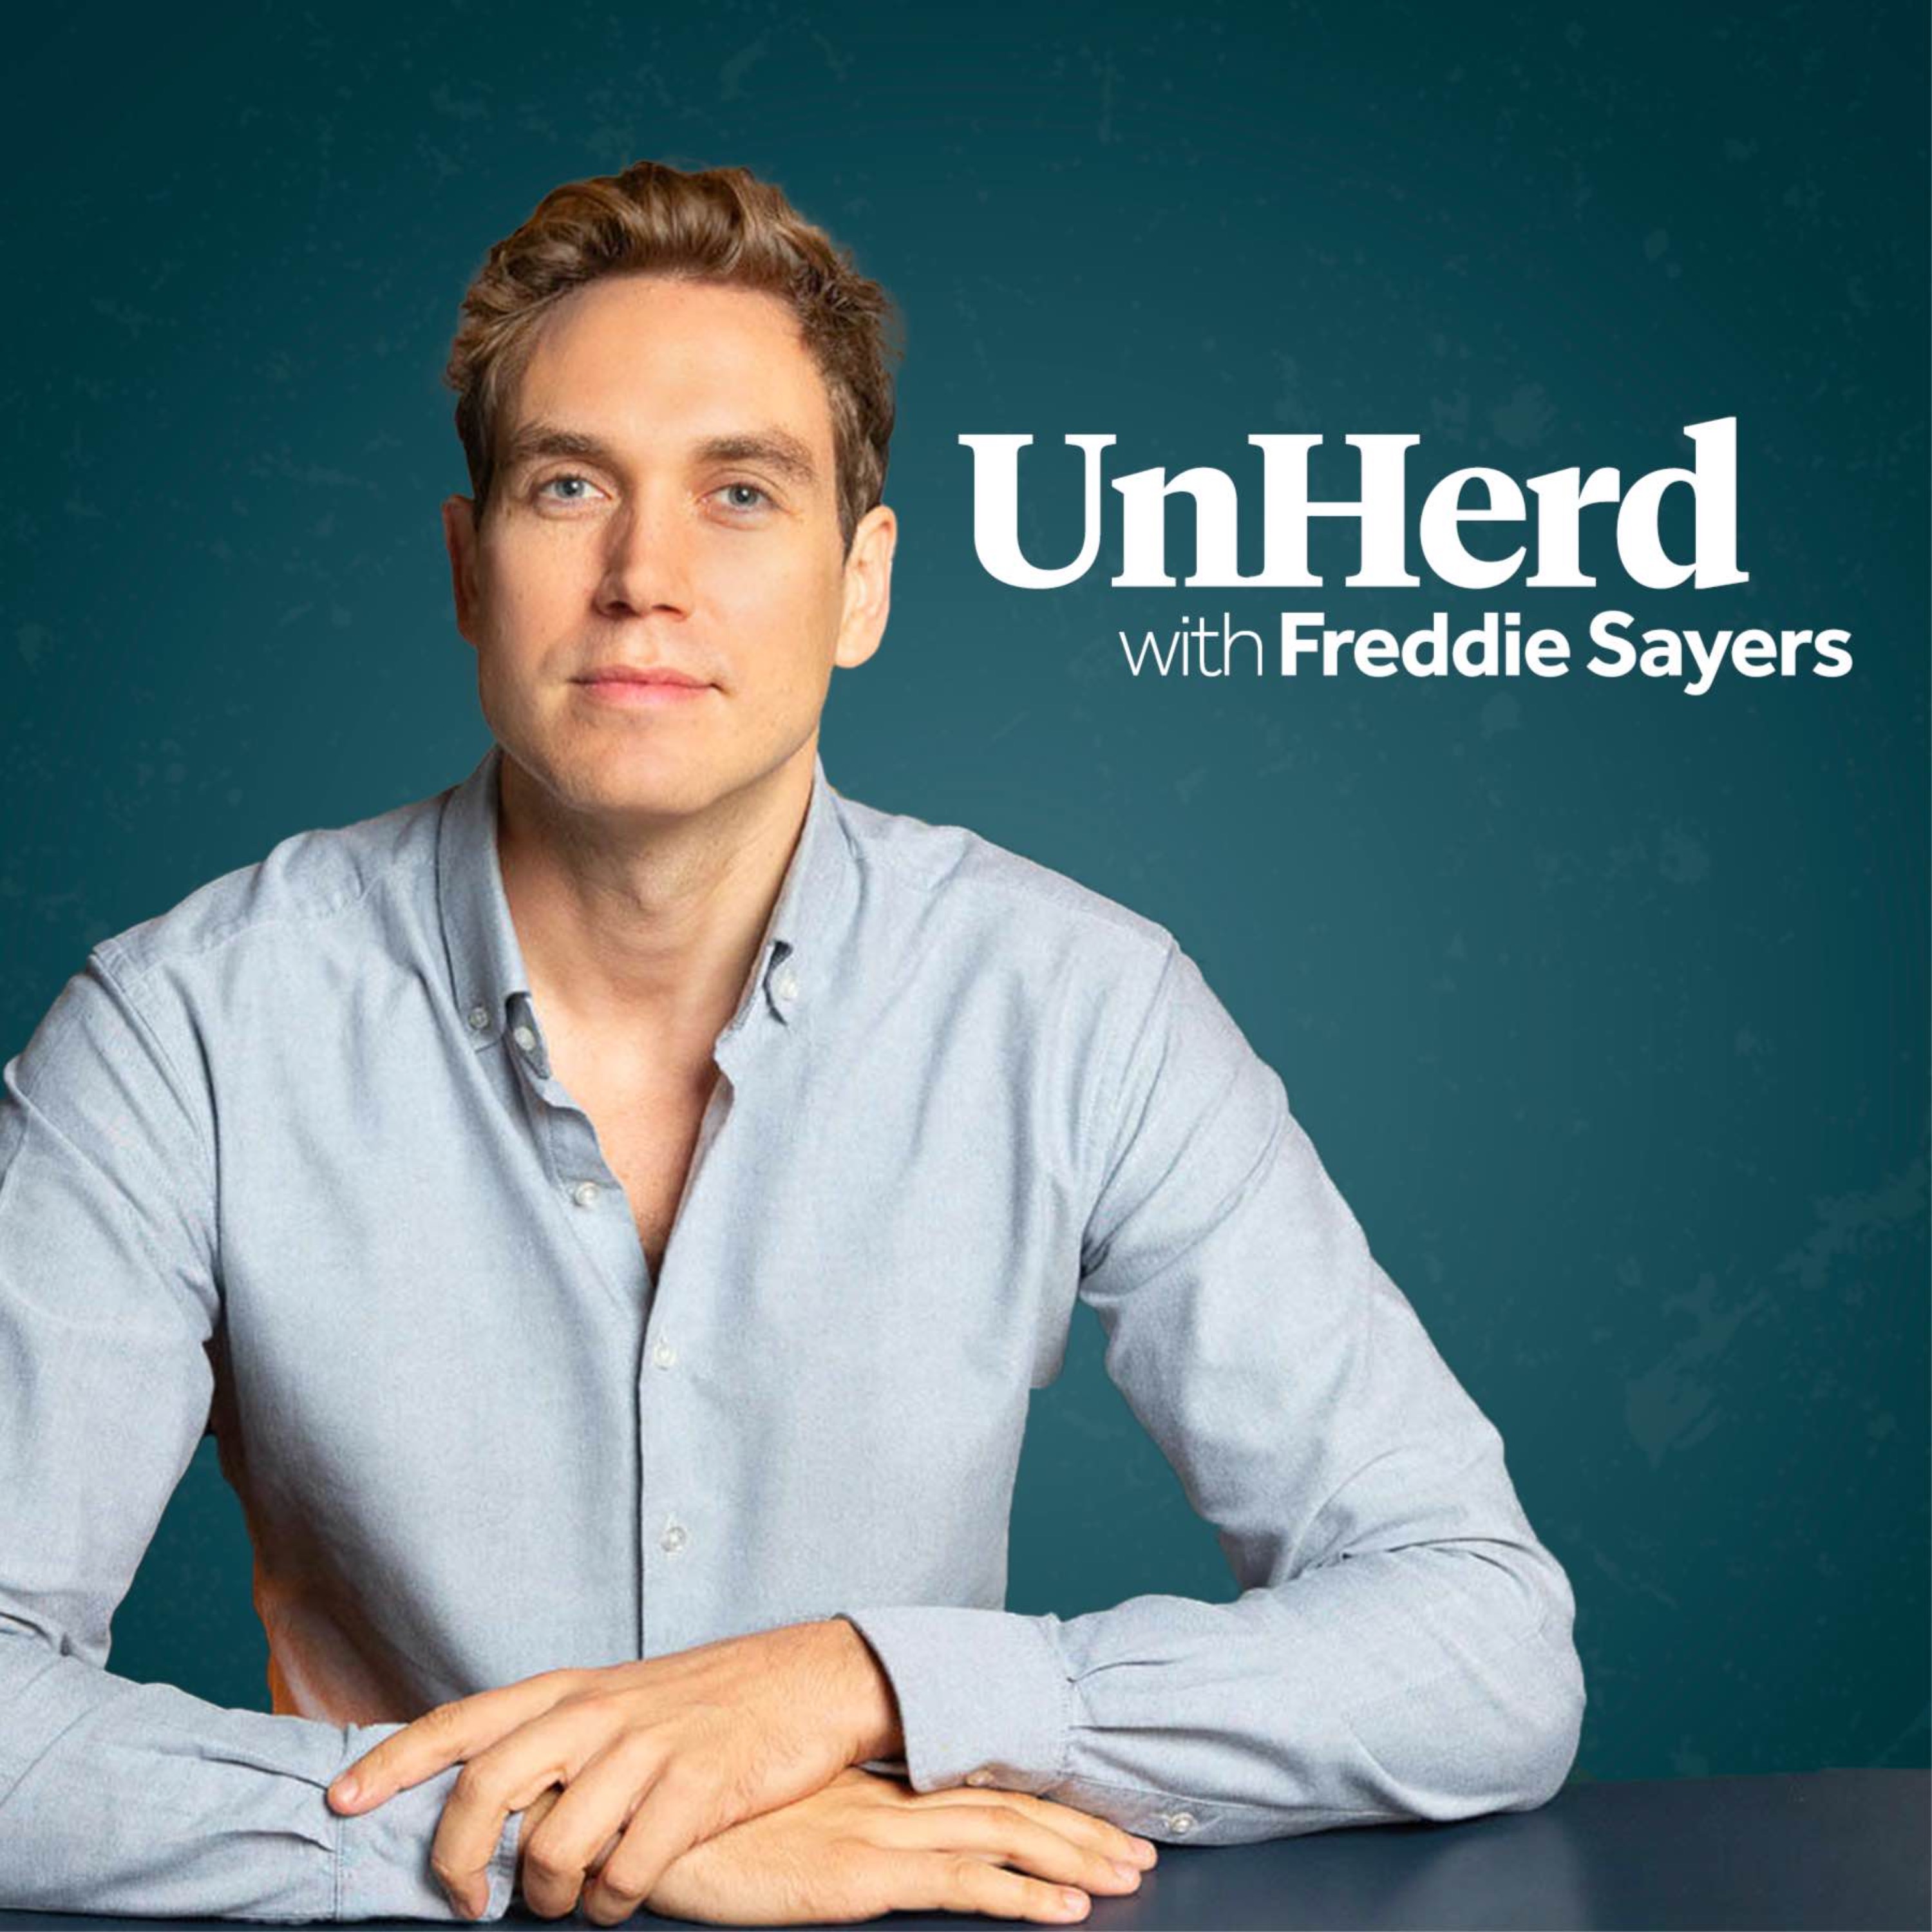 UnHerd with Freddie Sayers